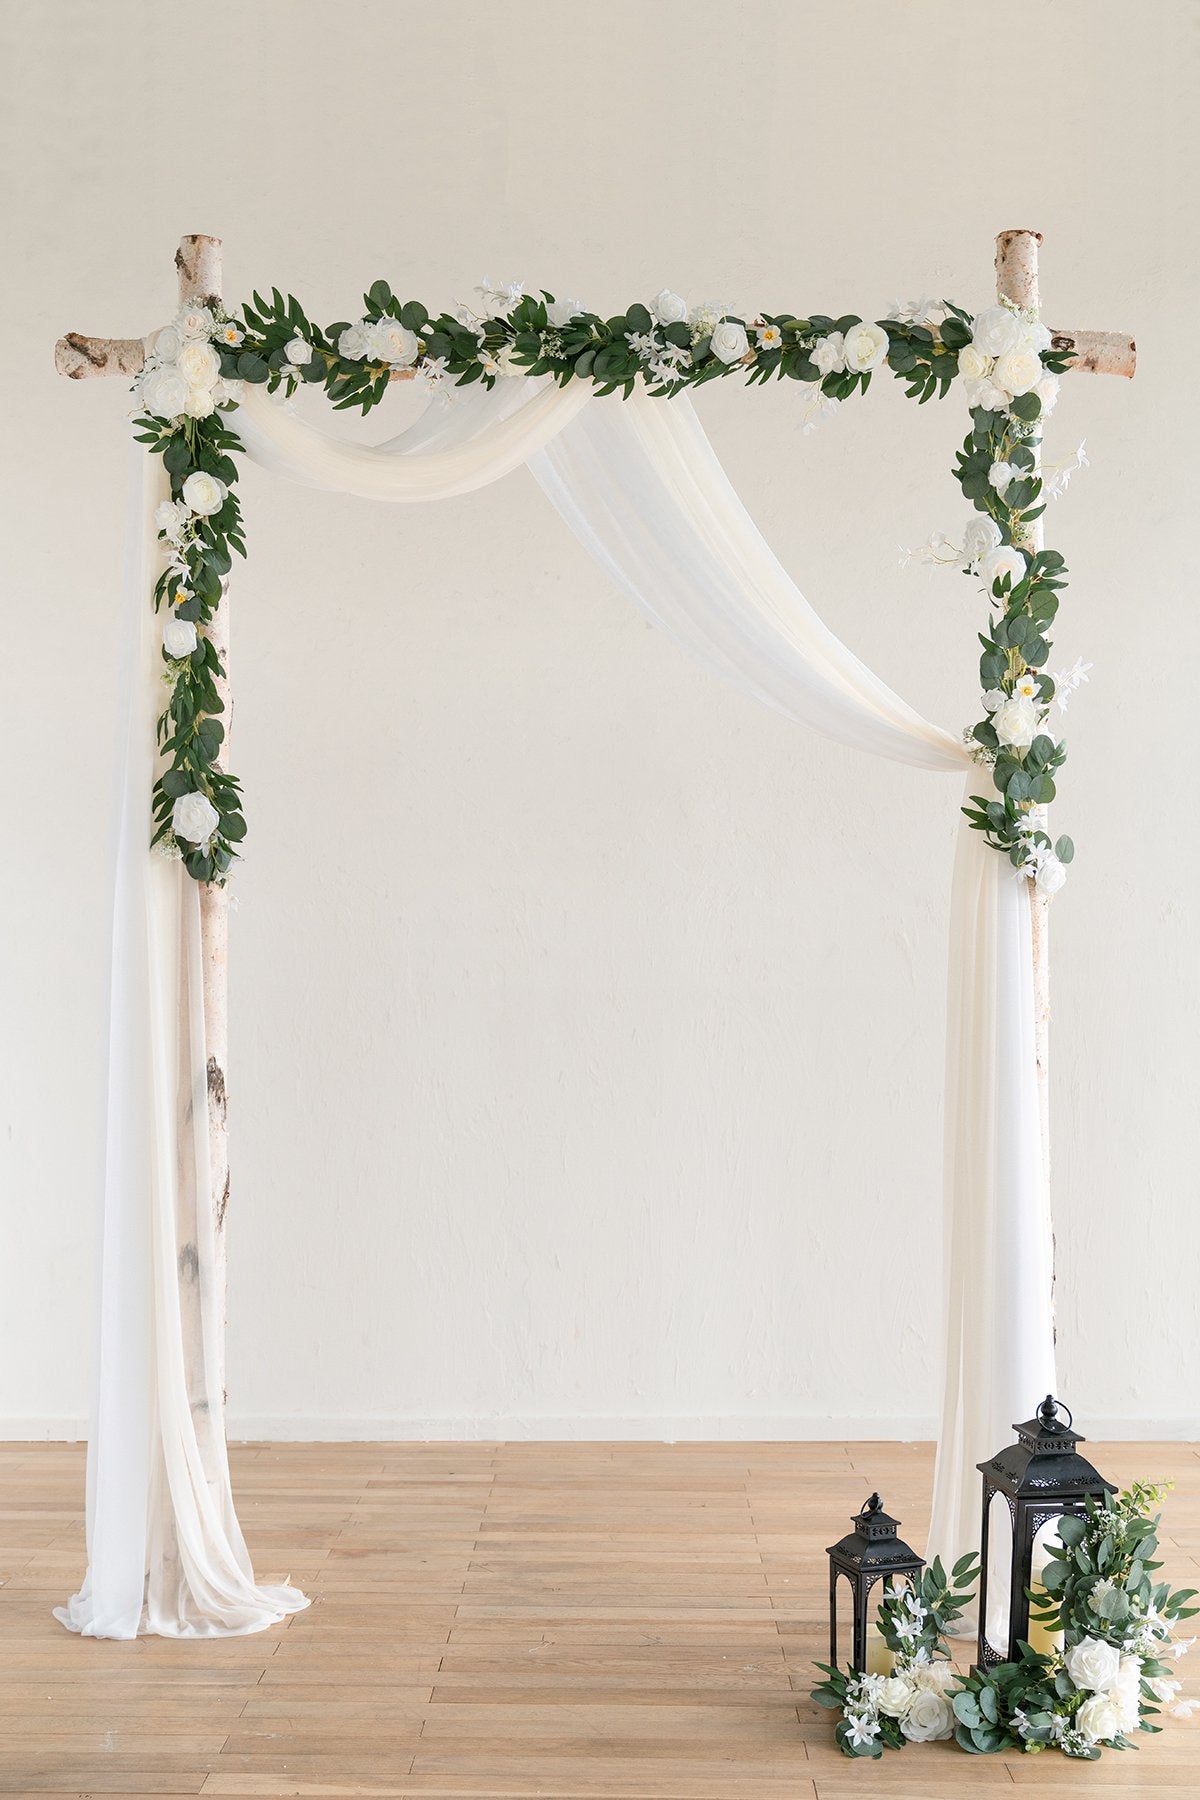 6.5ft Arch Flower Garlands with Sheer Drape - 3 Colors